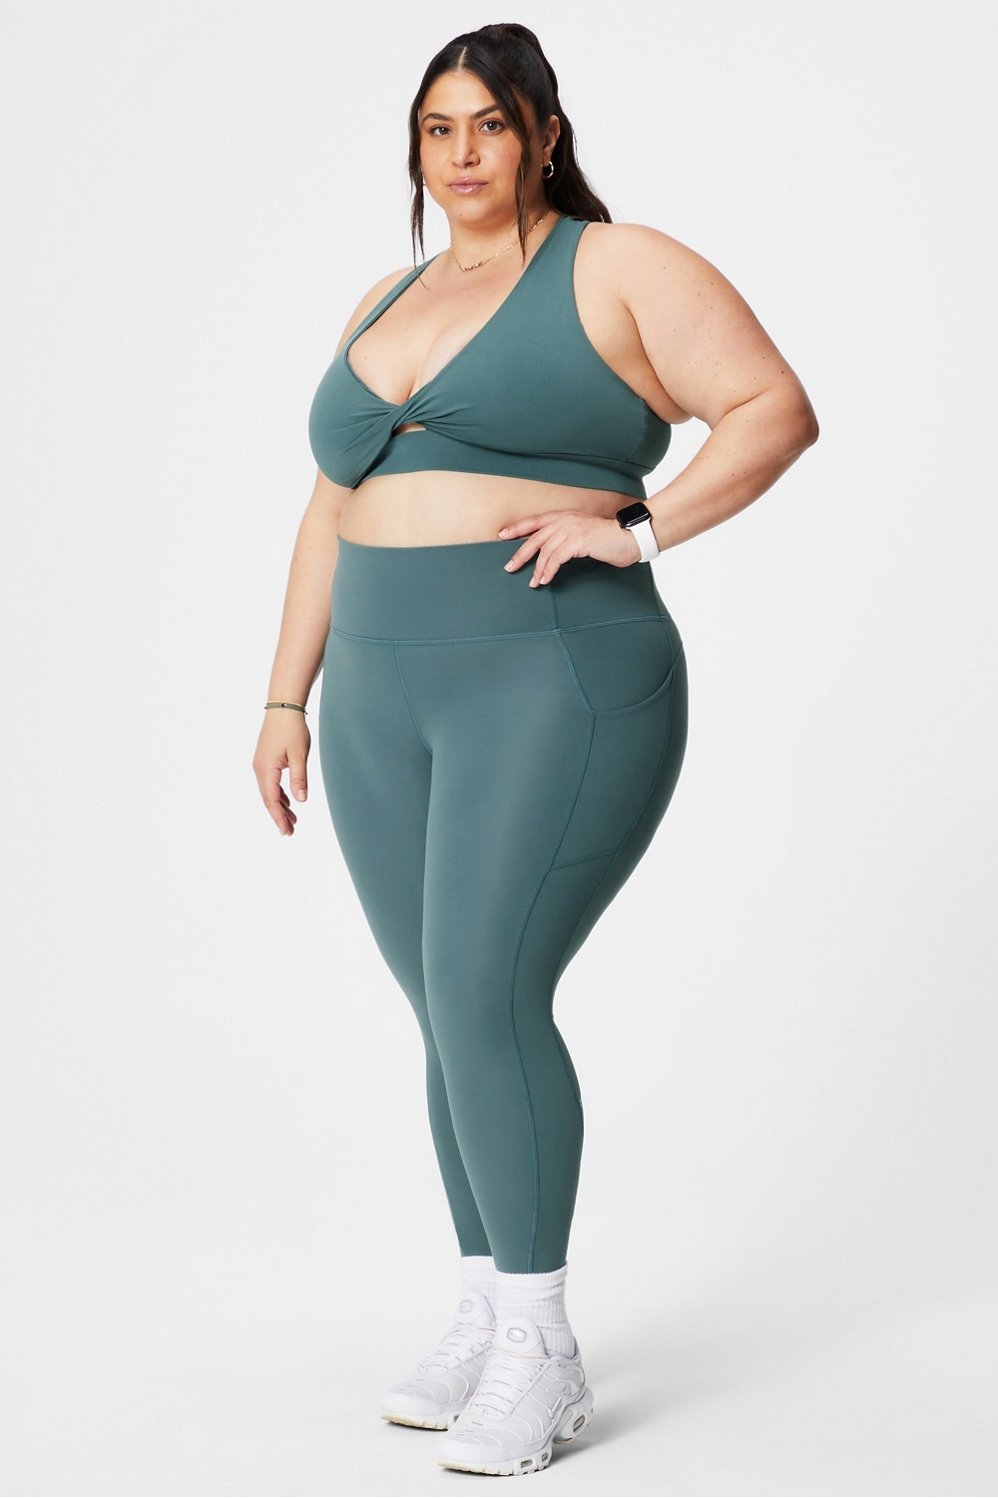 Women's Plus Size 1 Waistband Solid Peach Skin Leggings. - 1 Elastic  Waistband - Full-Length - Inseam approximately 28 - One size fits most plus  16-20 - 92% Polyester / 8% Spandex, 7300939